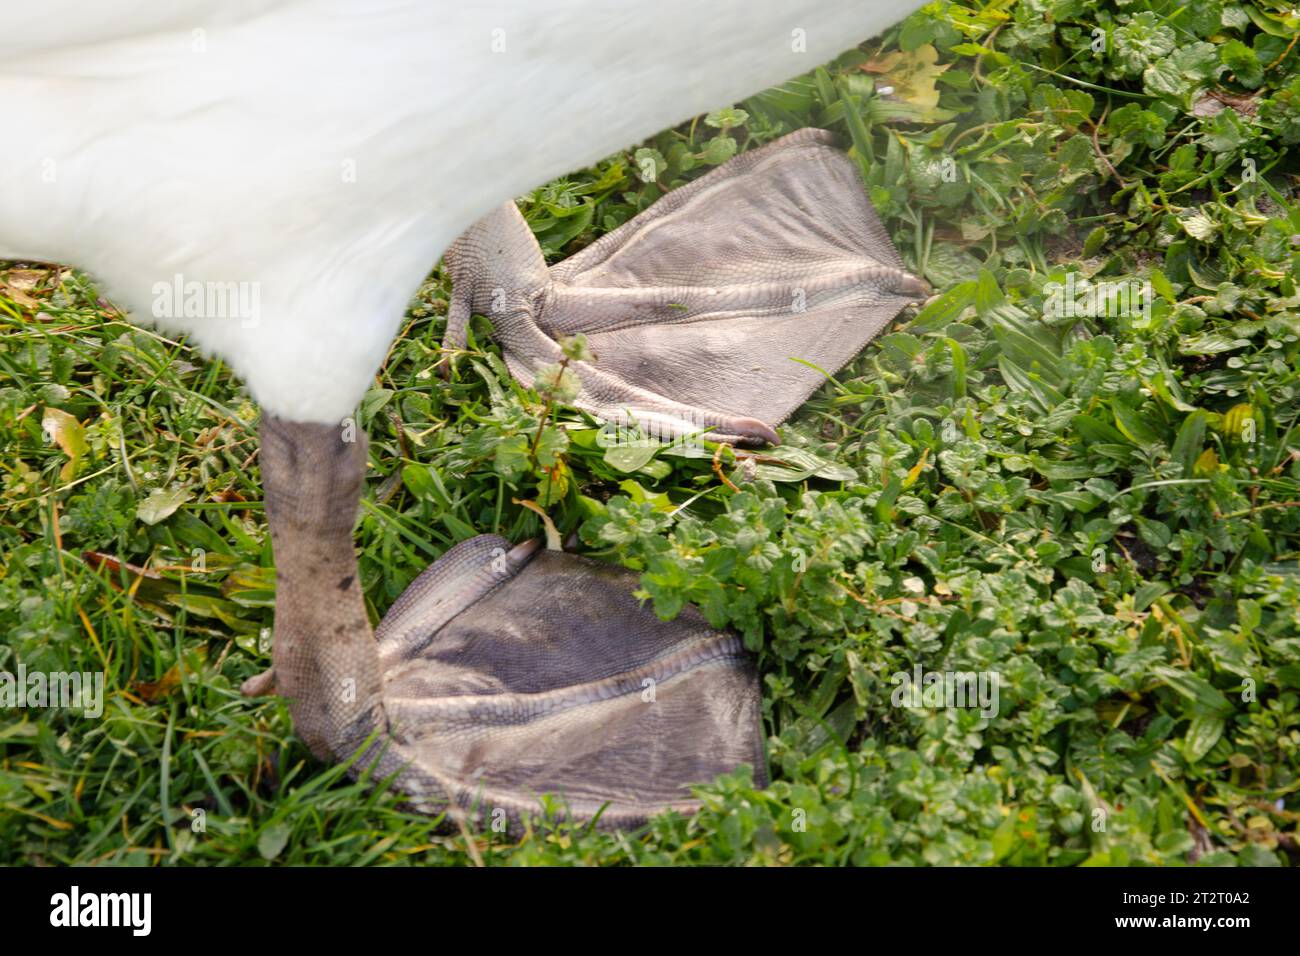 Close-up of webbed feet of a swan standing on green grass. Concept: standing firmly on its feet. Stock Photo